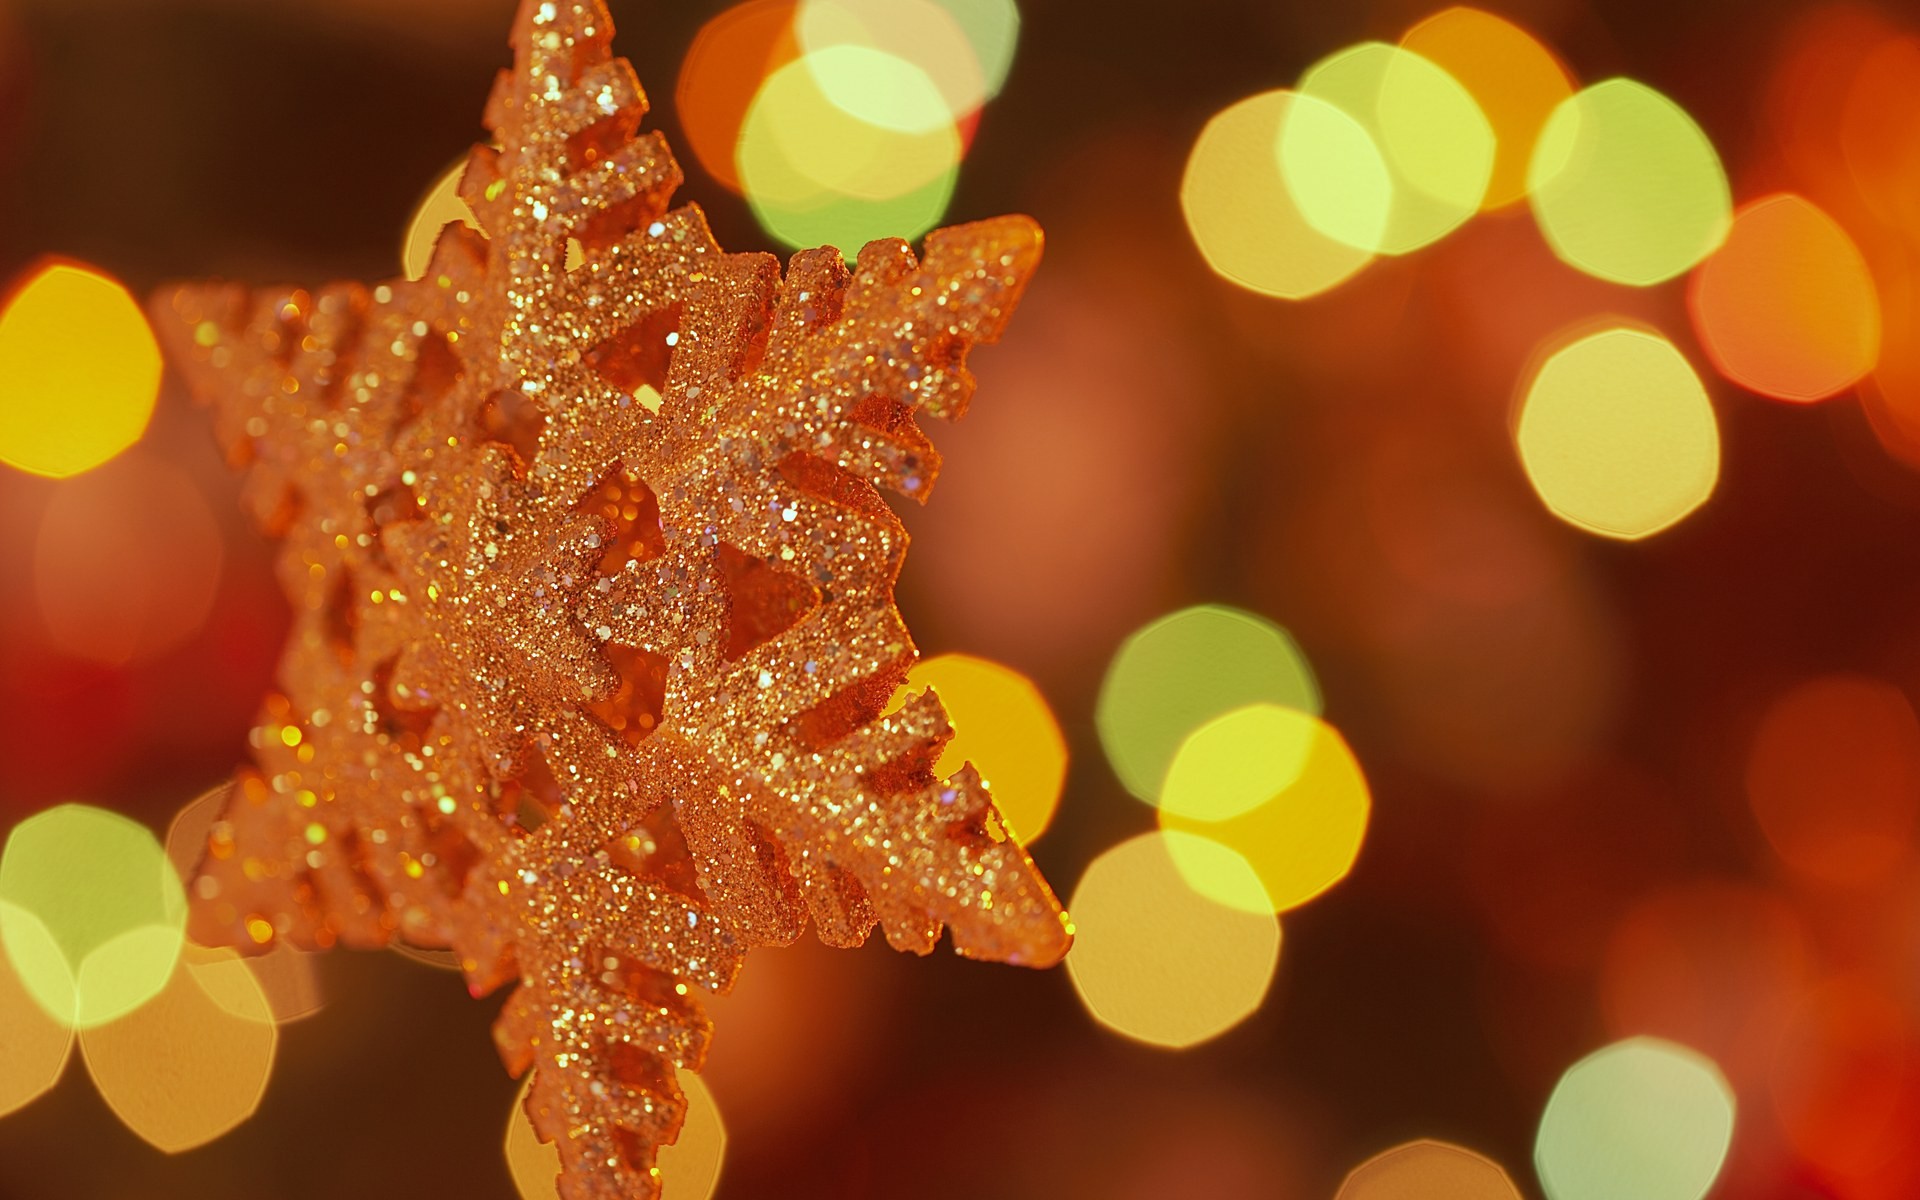 Happy Christmas decorations wallpapers #1 - 1920x1200